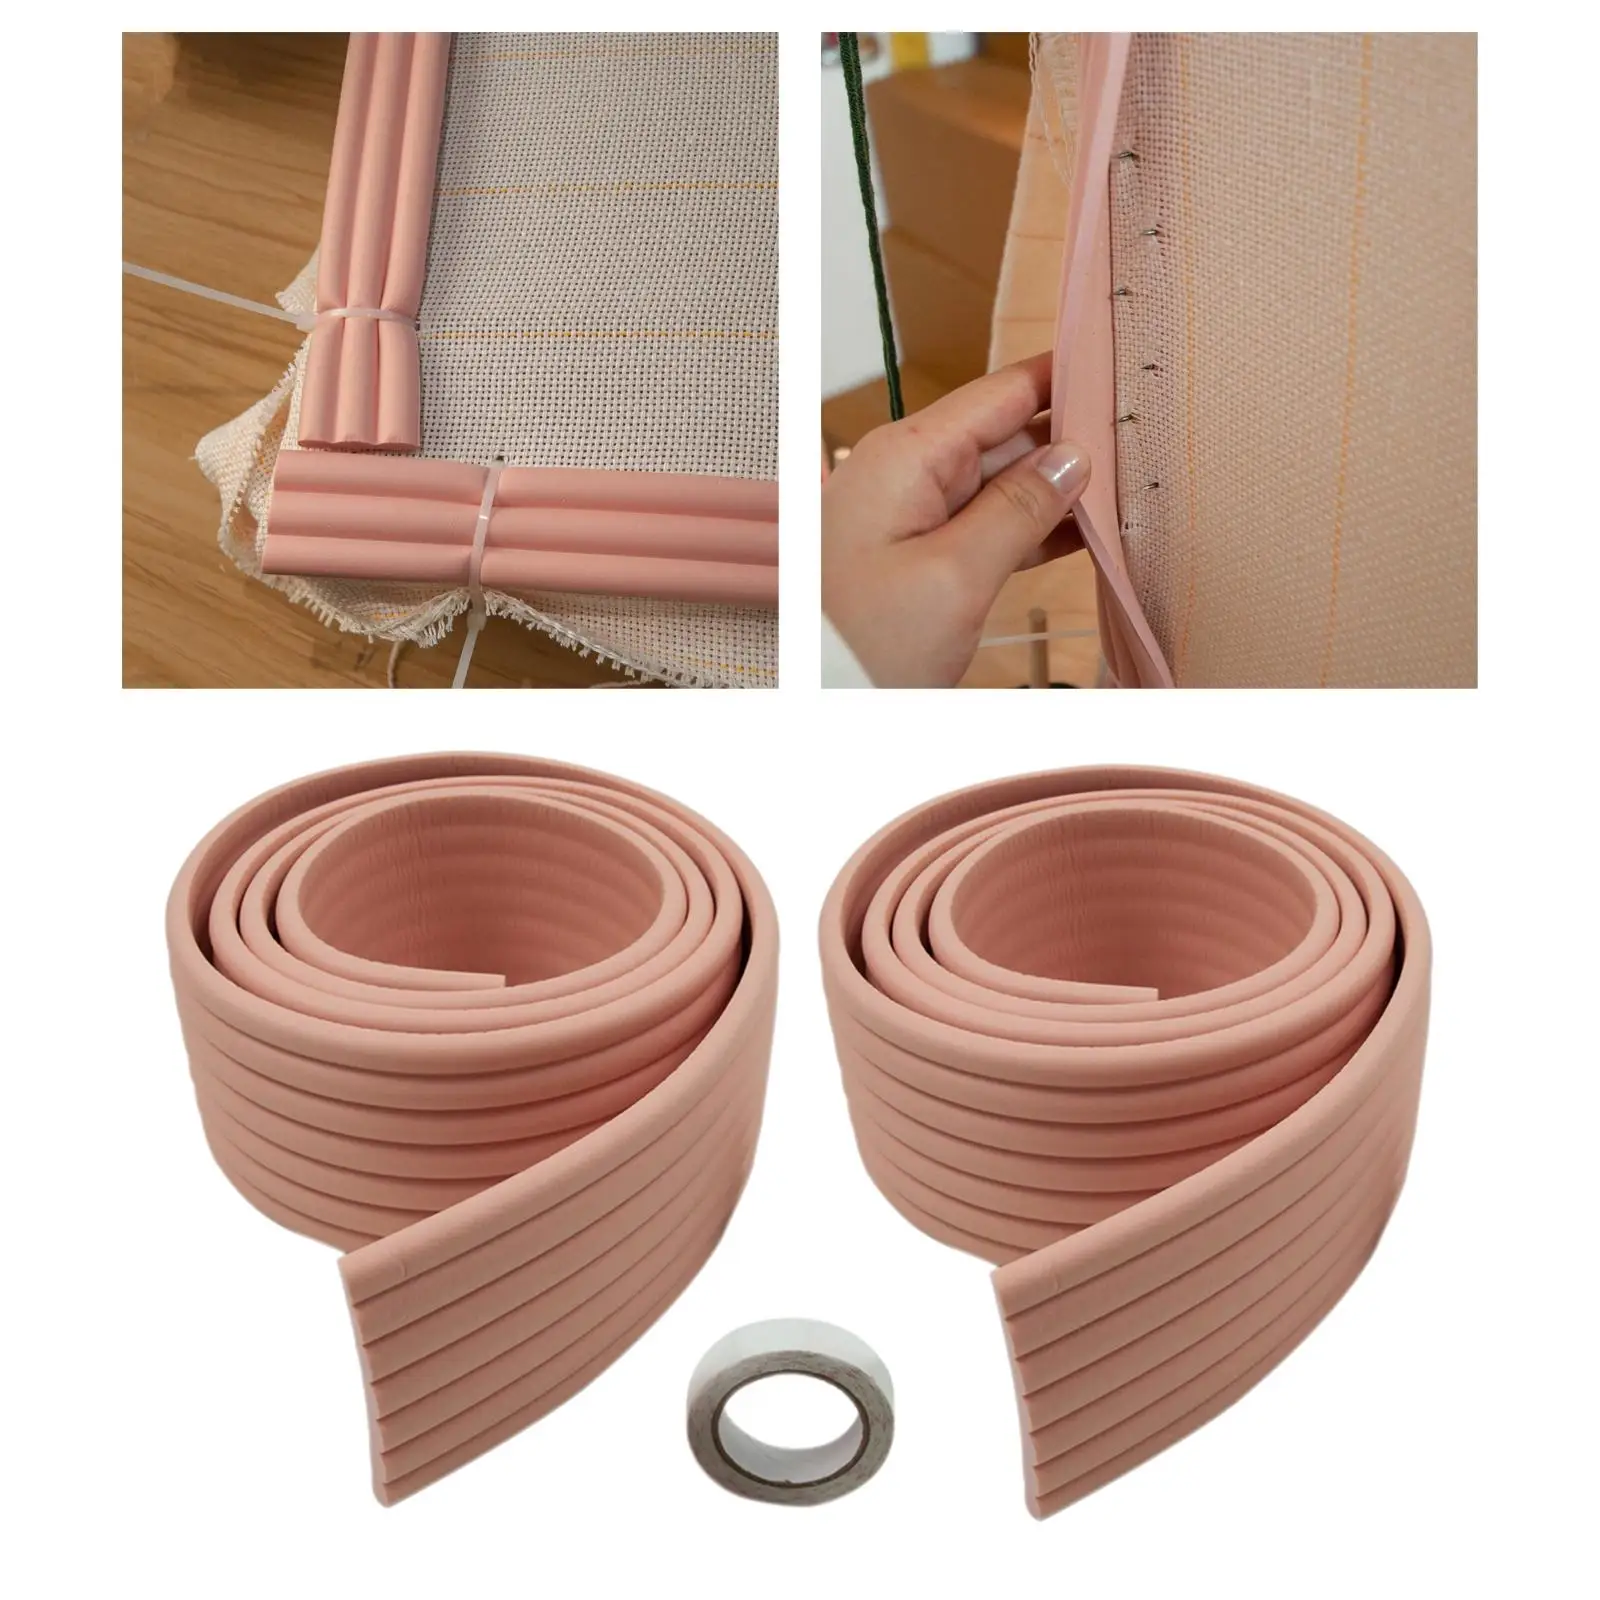 200cm Tufting Frame Foam Strip Edge Cover Cushion Protector Safety DIY Crafts for Rug Making Child Countertop Furniture Quilting